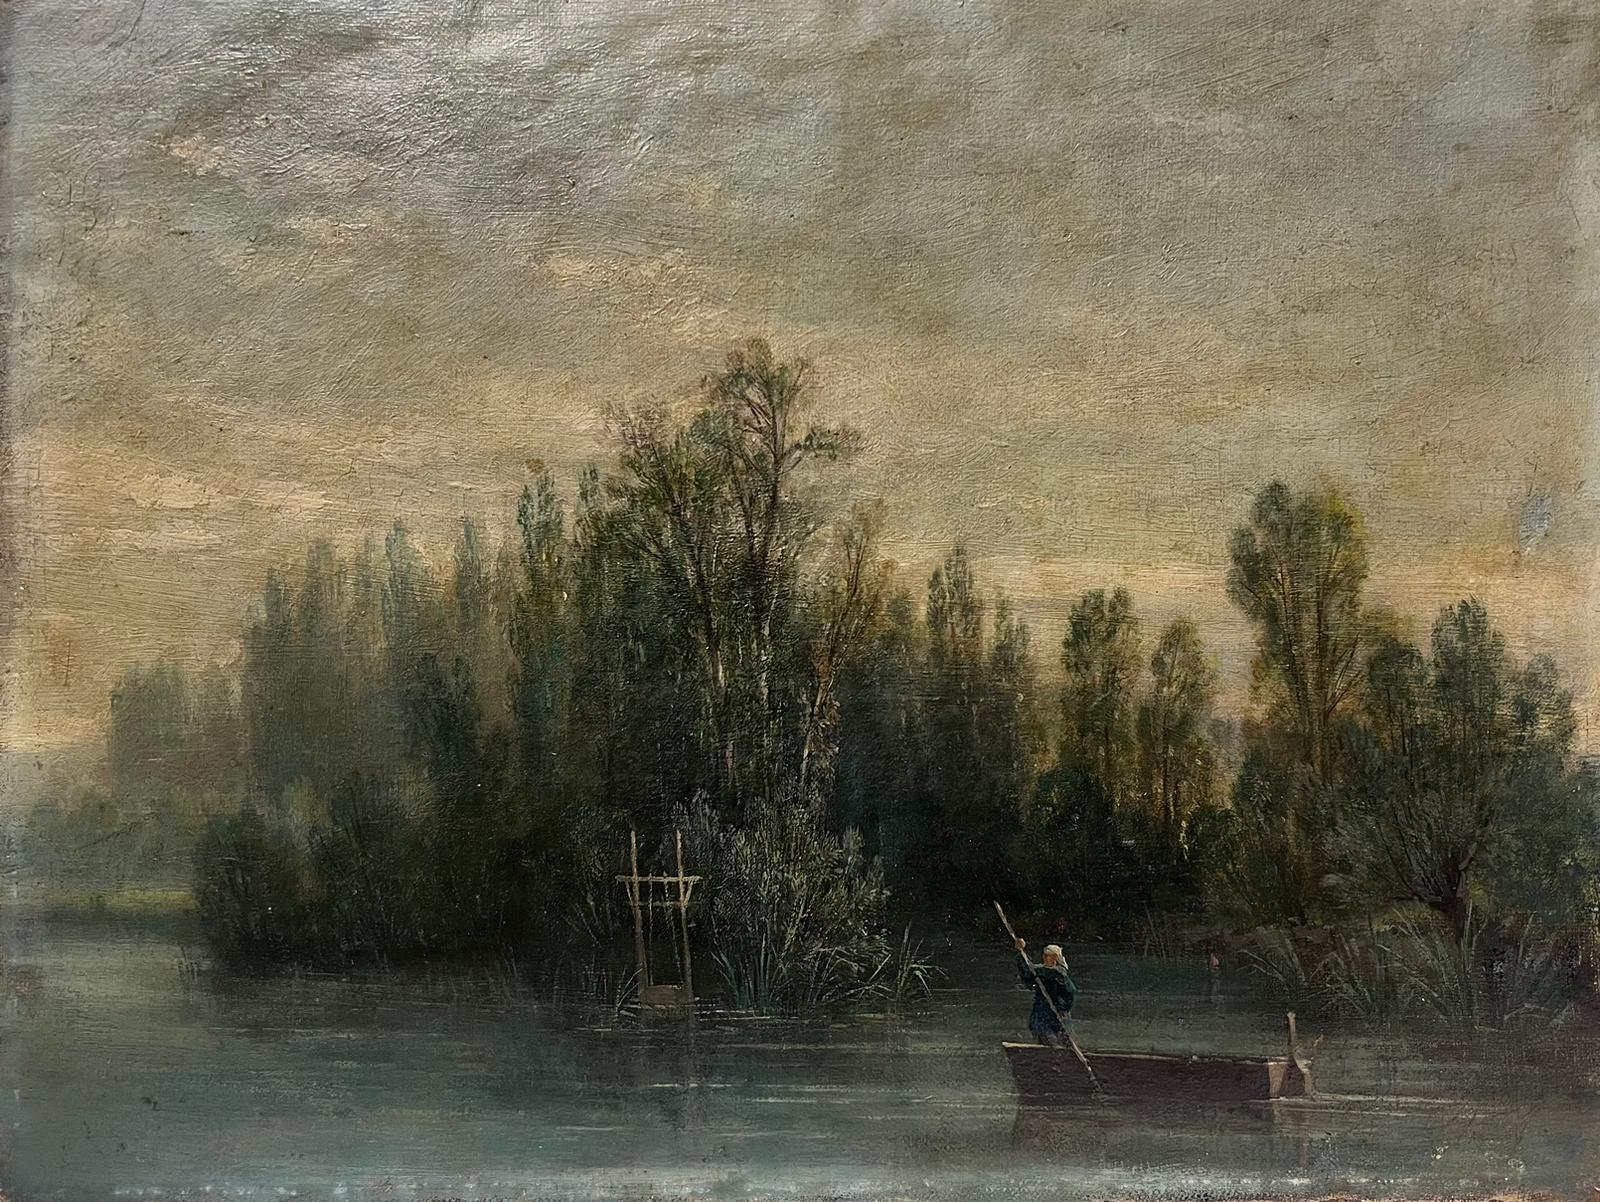 Figure in Boat on the River
French Barbizon School, late 19th century
oil on canvas, unframed
canvas: 11 x 14.5 inches
provenance: private collection, France
condition: very good and sound condition